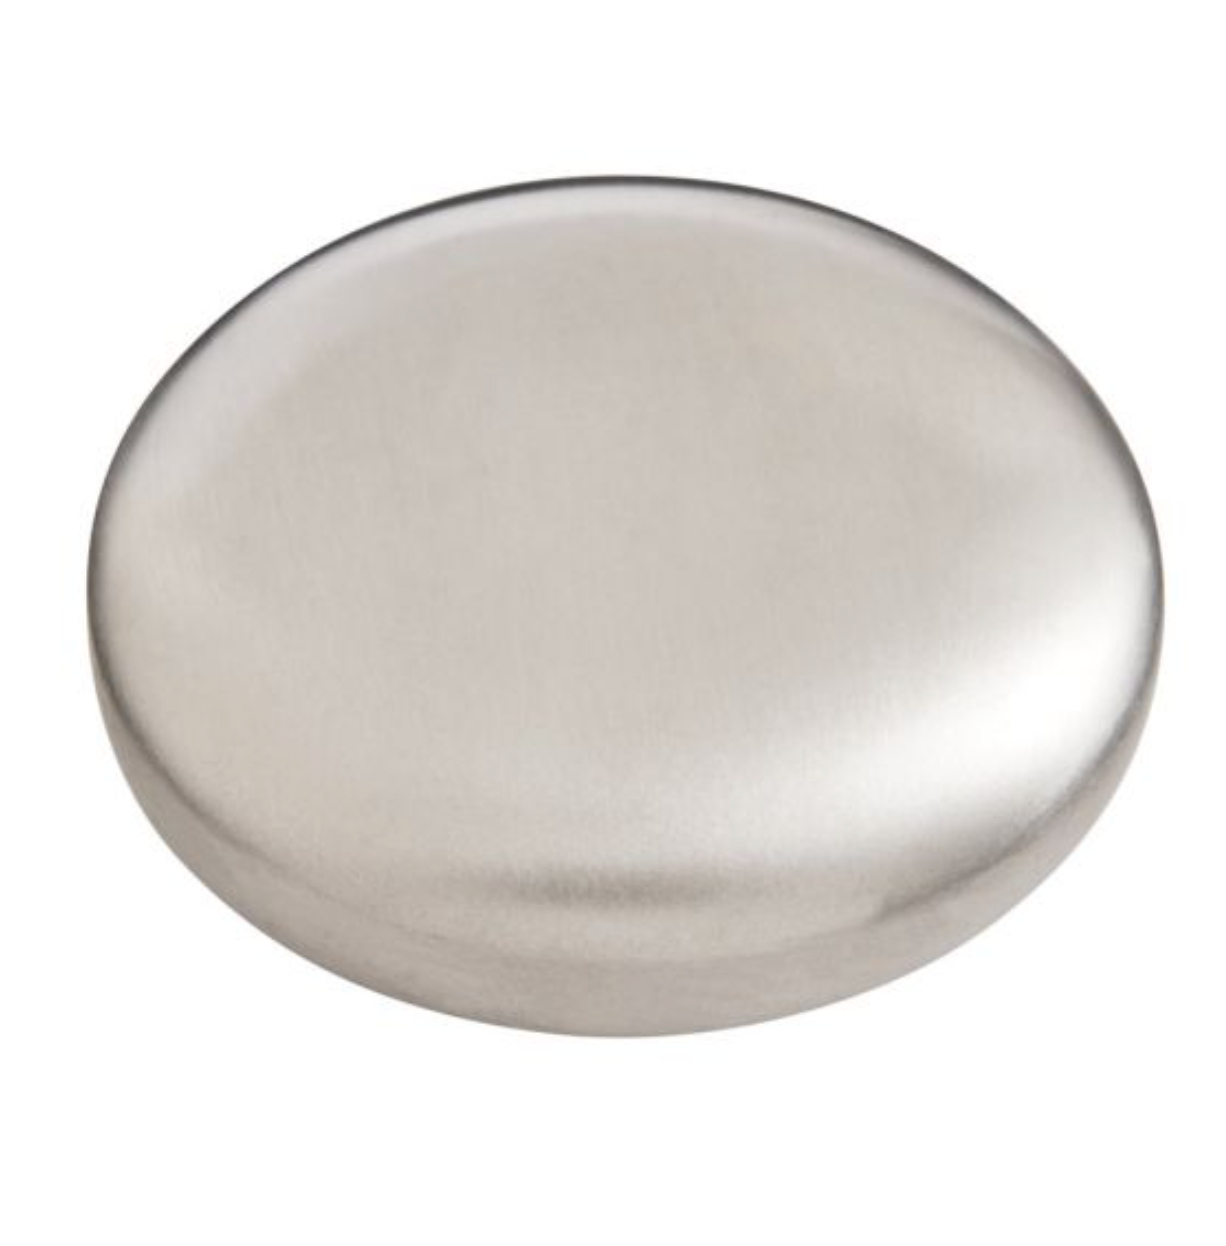 Stainless Steel Soap Naturally Removes Strong Odors From Hands